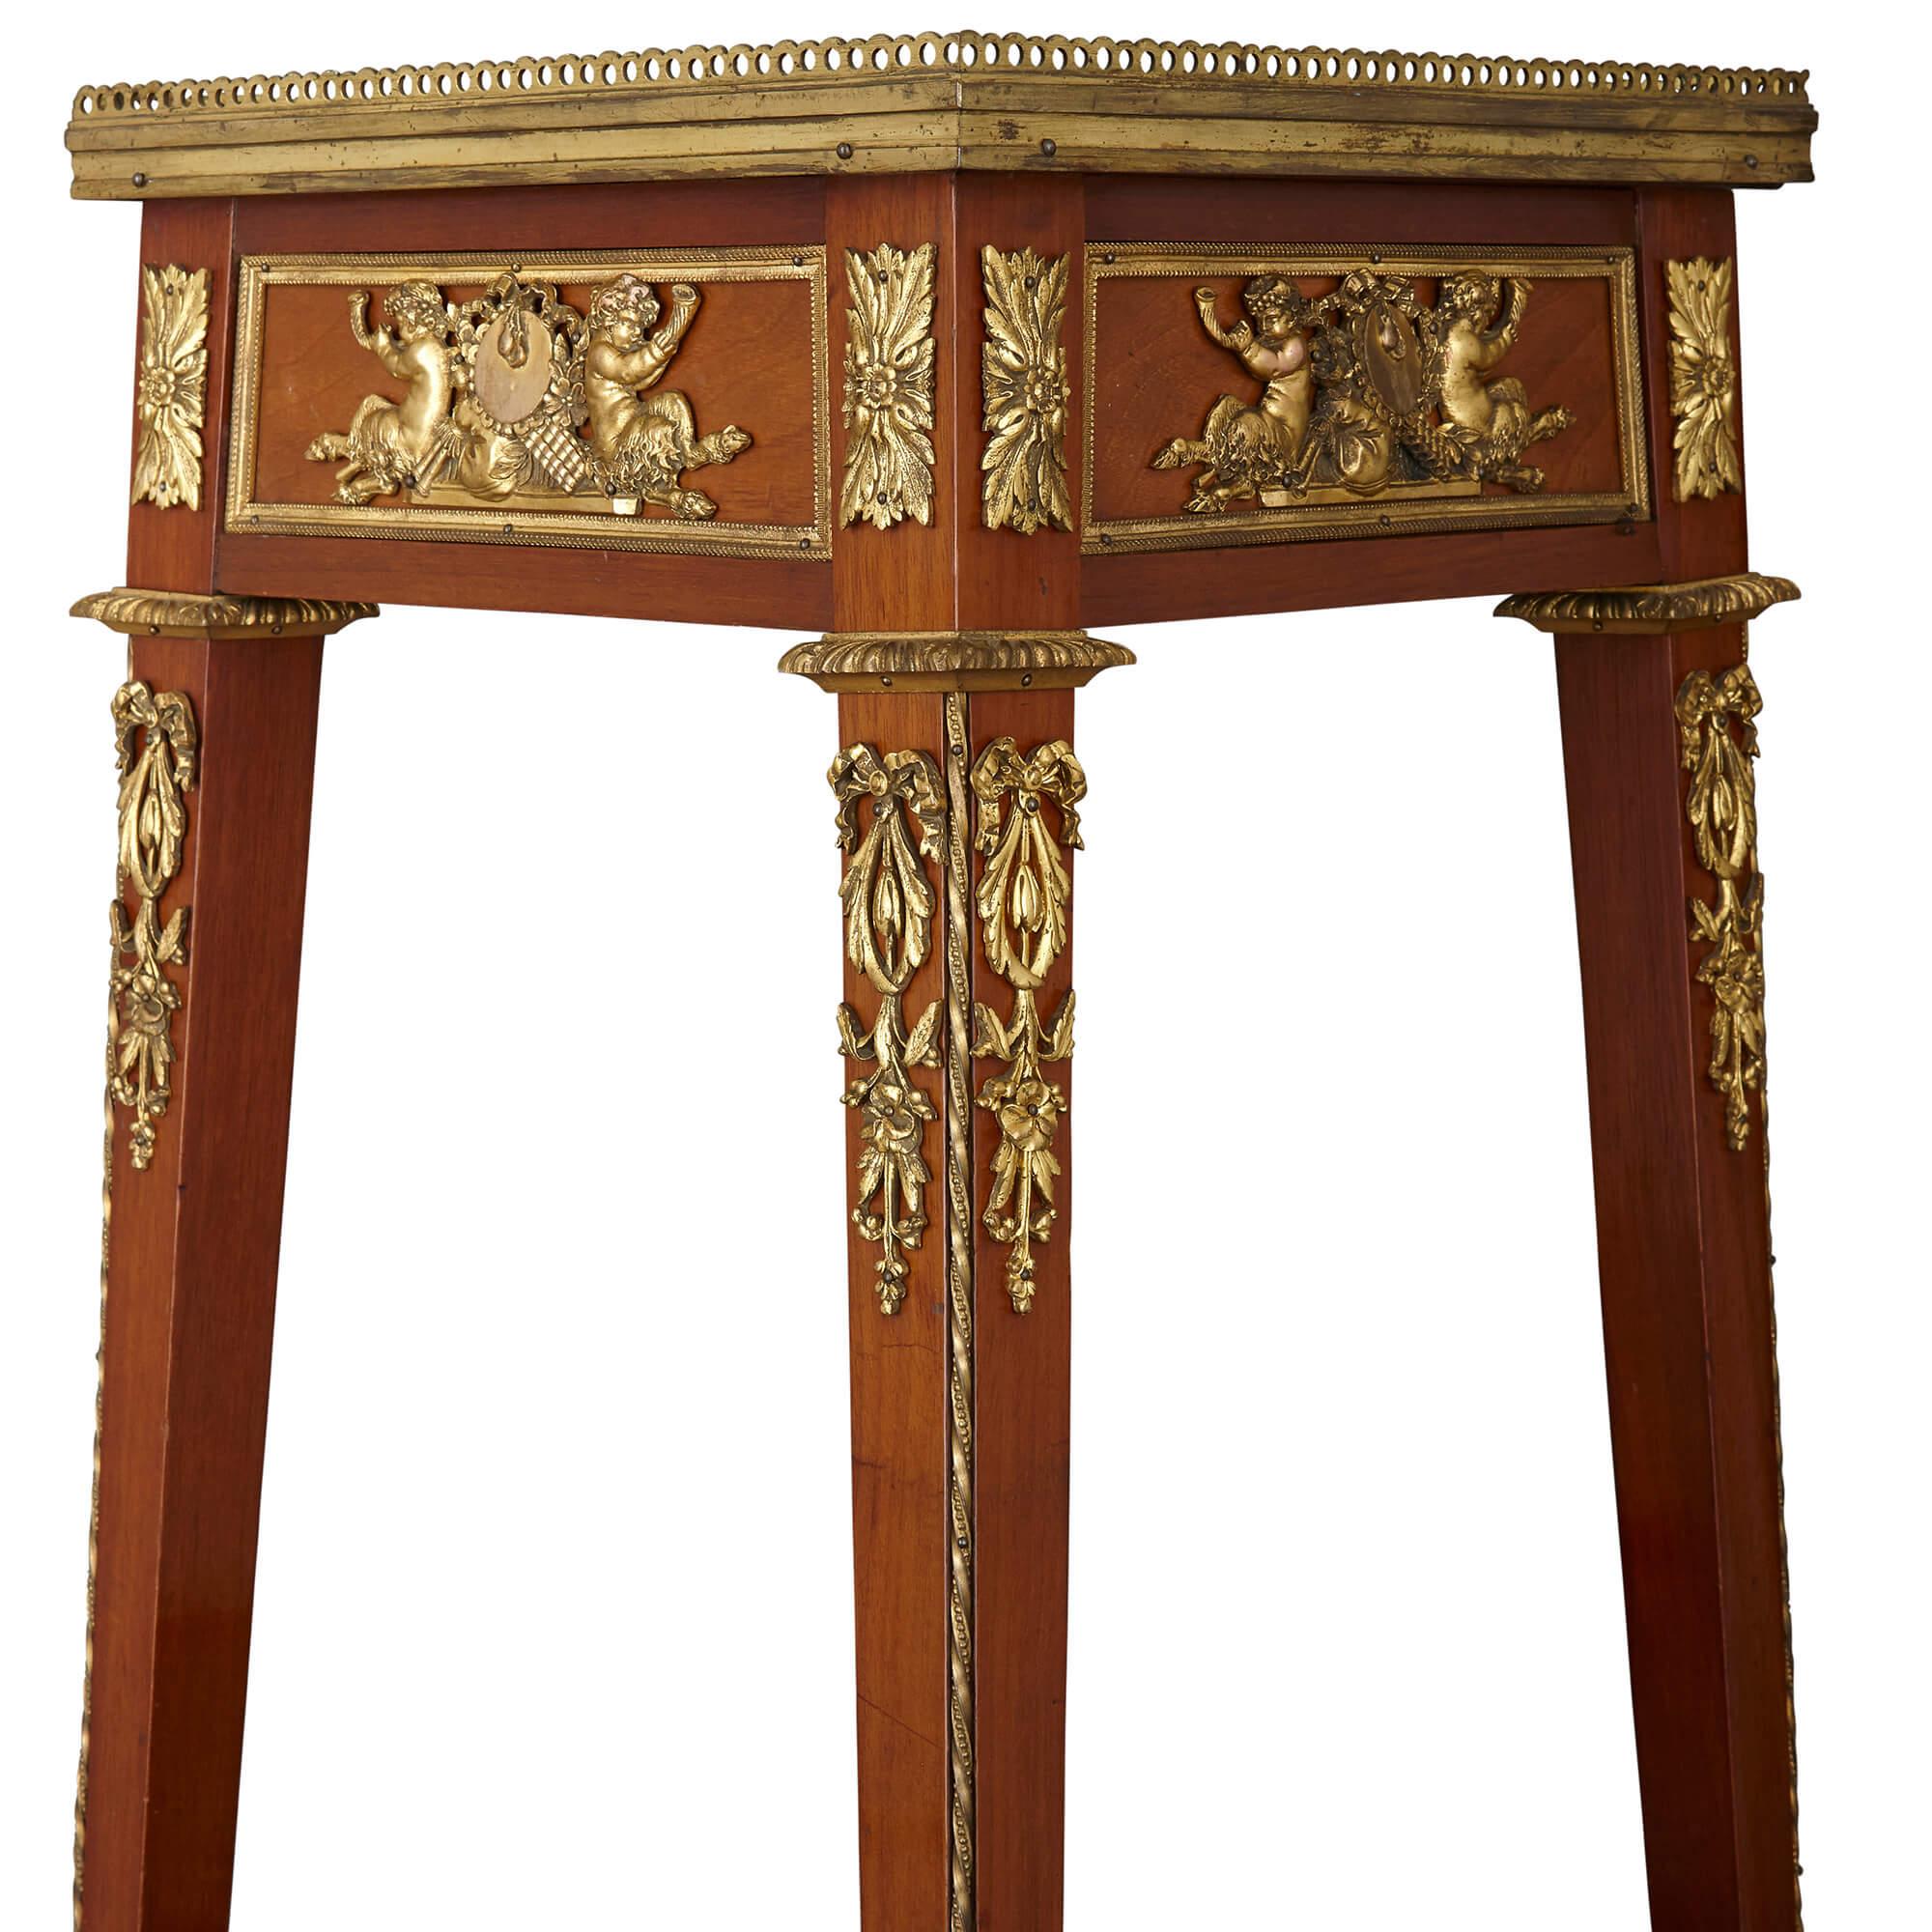 19th Century Fine Louis XVI Style Ormolu-Mounted Mahogany Stand with Onyx Top For Sale